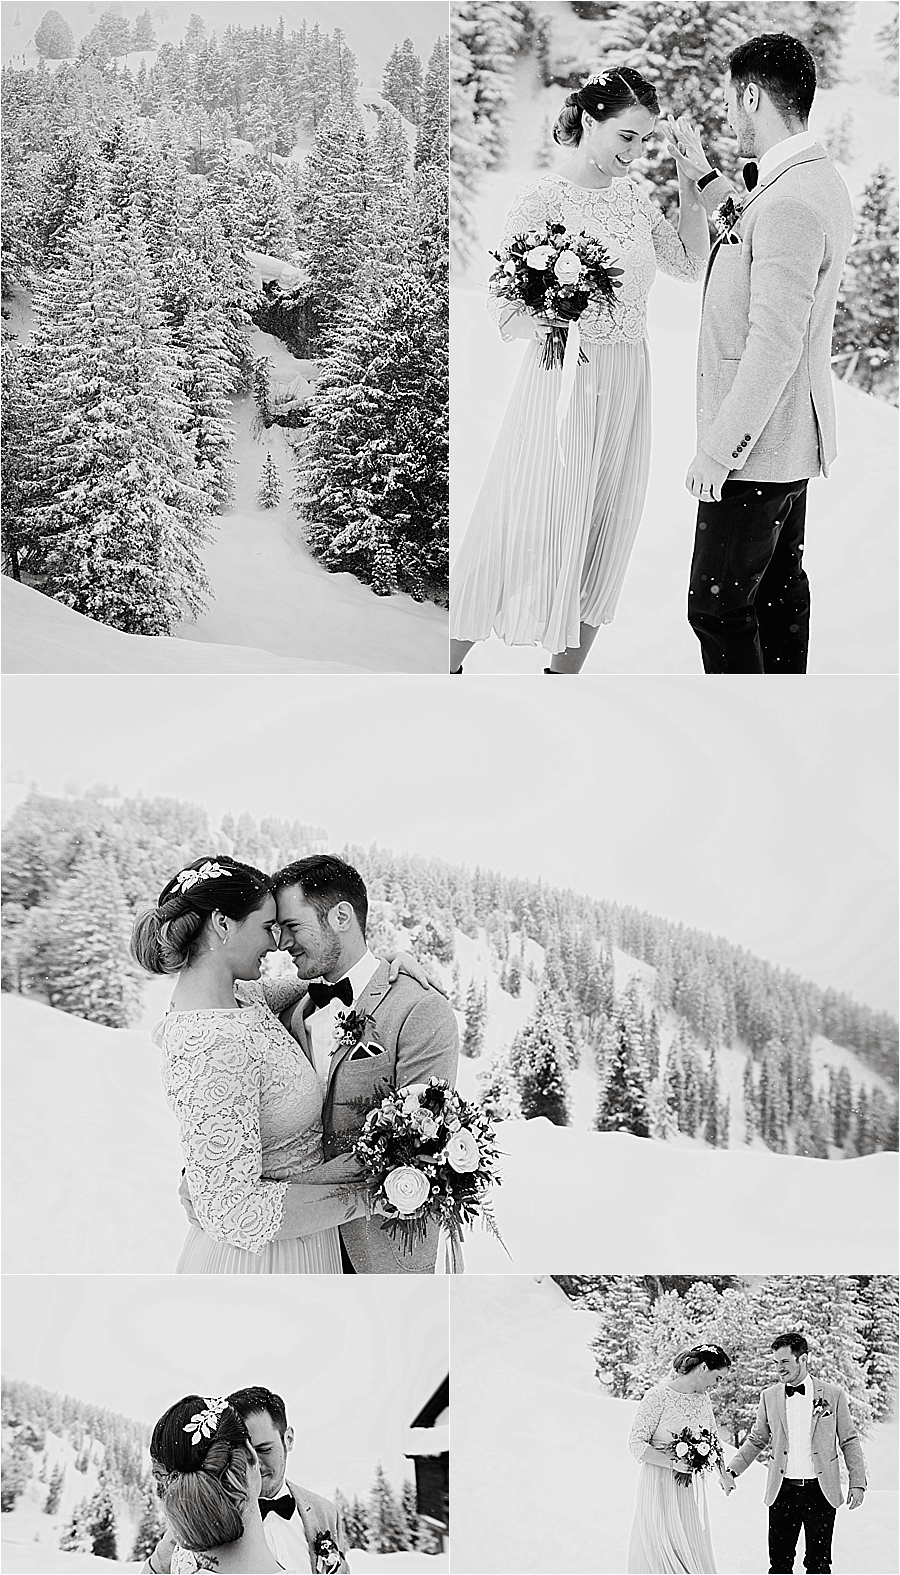 The bride and groom dance in the snow before their winter mountain elopement on the Penken in Mayrhofen by Wild Connections Photography